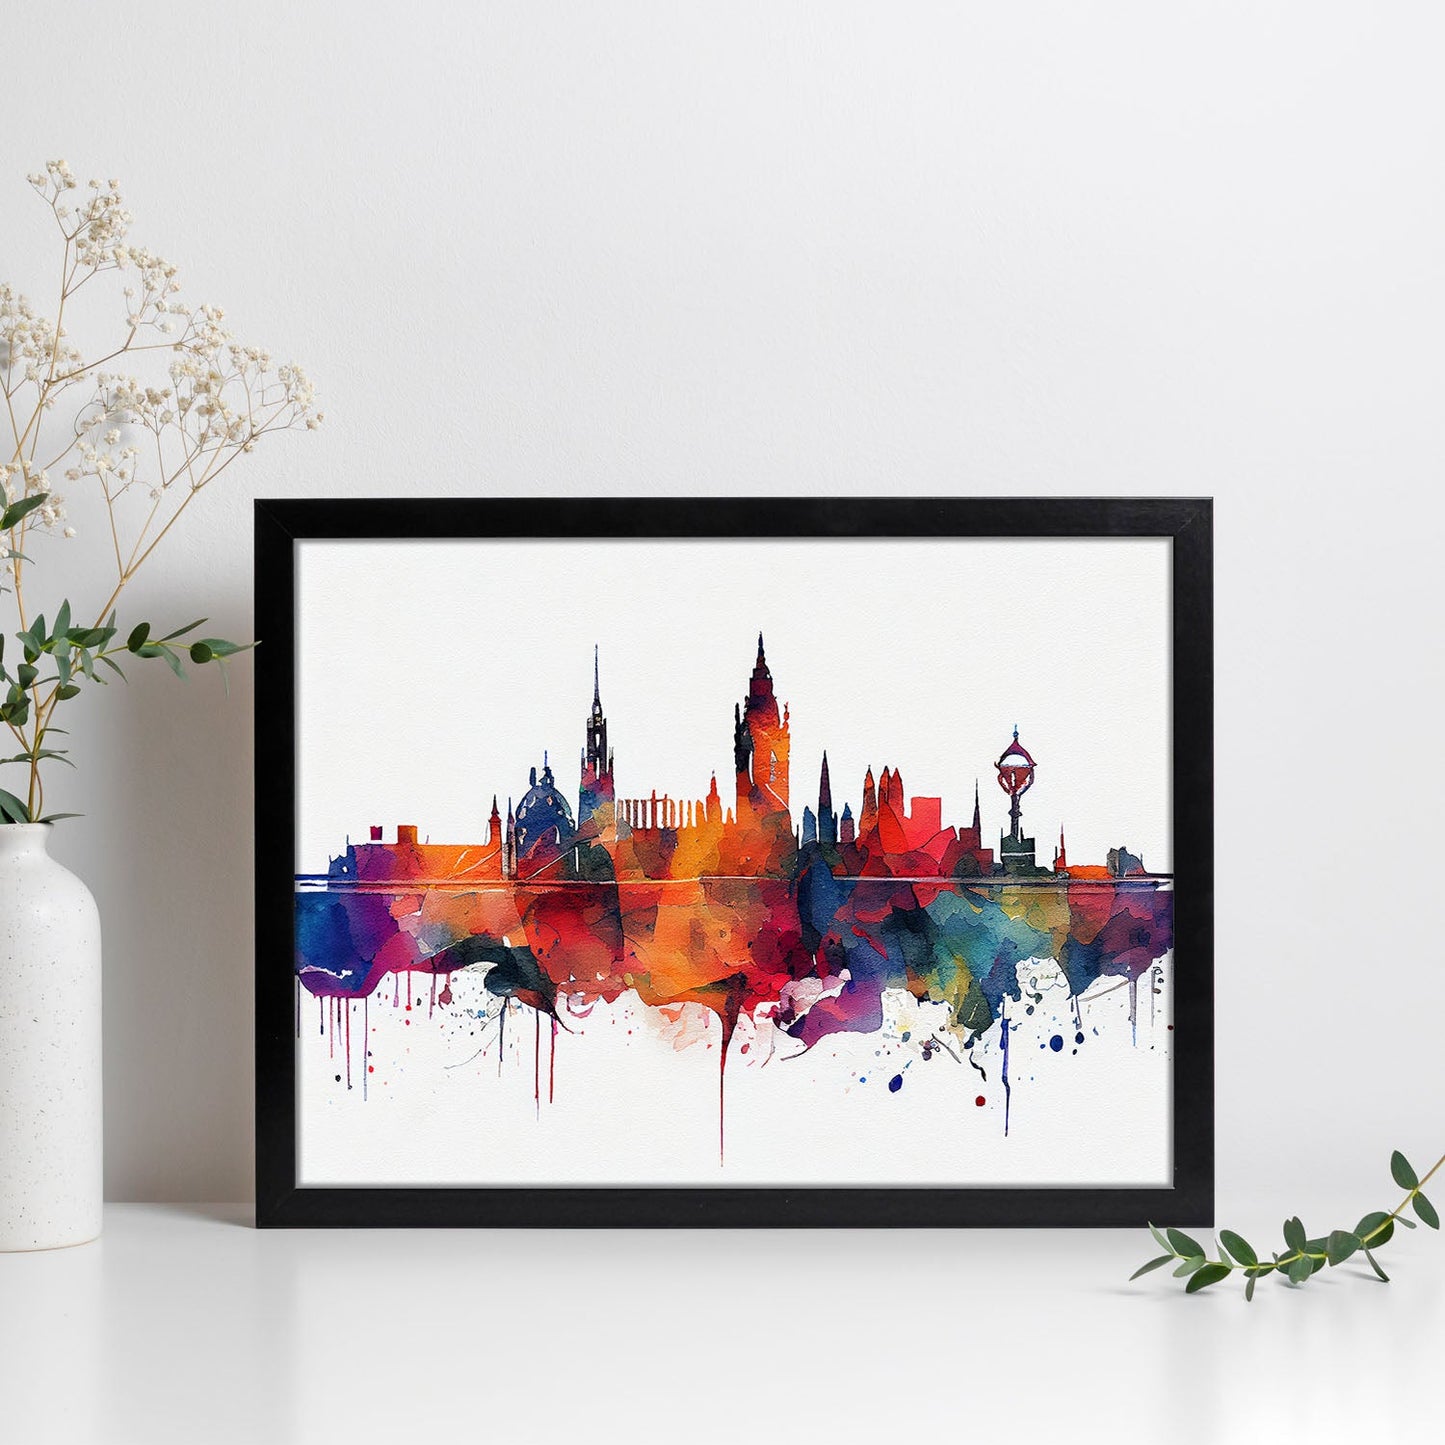 Nacnic watercolor of a skyline of the city of Edinburgh. Aesthetic Wall Art Prints for Bedroom or Living Room Design.-Artwork-Nacnic-A4-Sin Marco-Nacnic Estudio SL